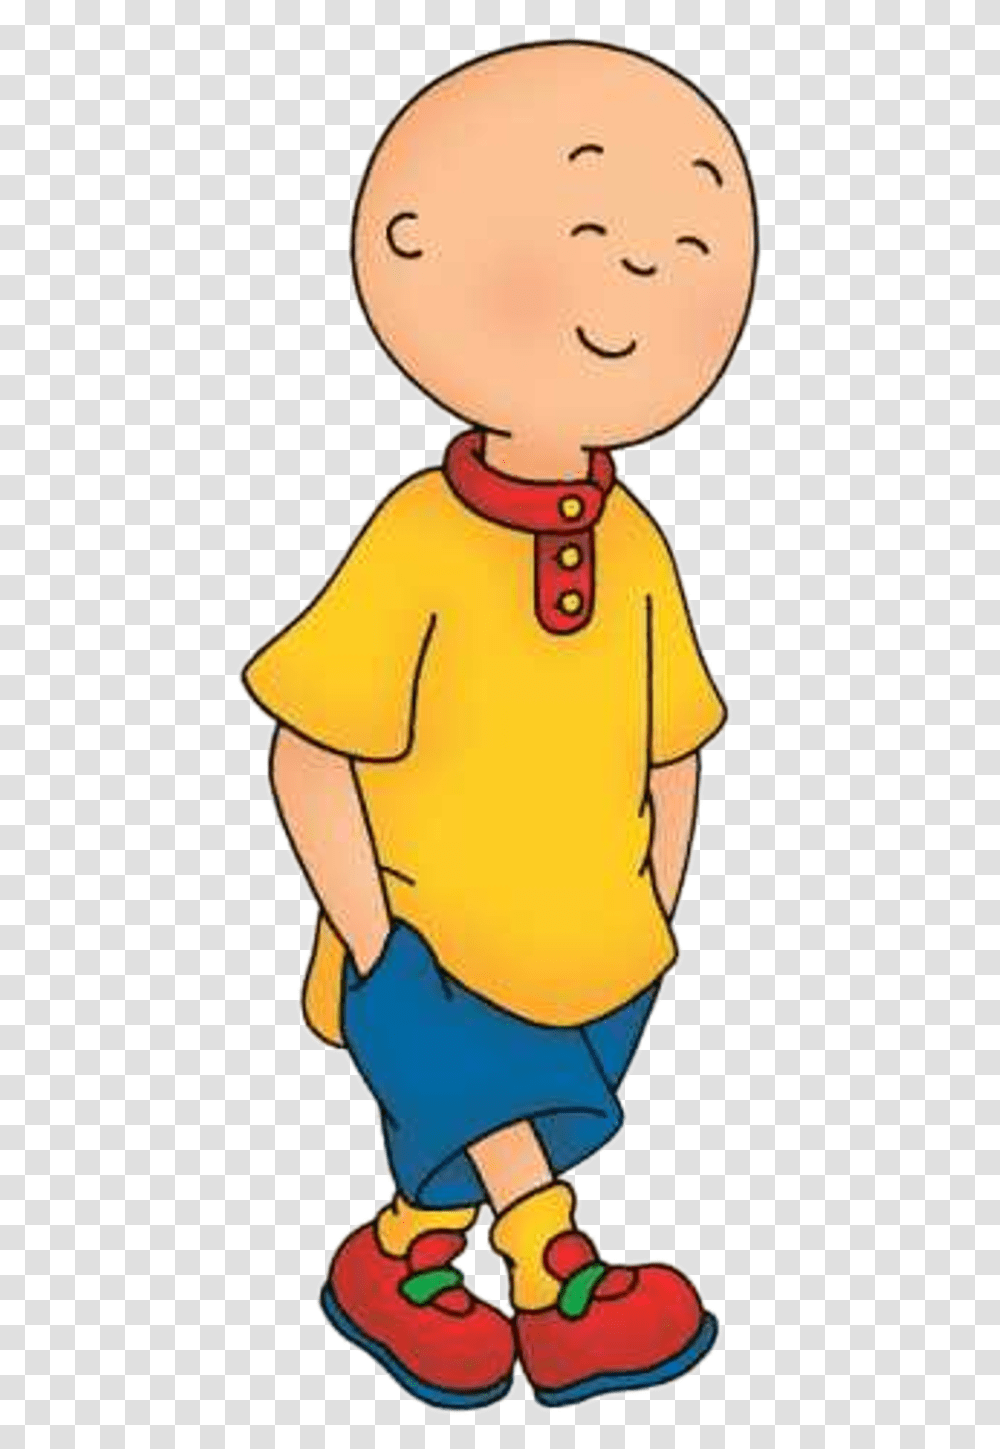 Download Art Caillou Youtube Mom Child Cartoon Hq Image Caillou, Clothing, Apparel, Outdoors, Shorts Transparent Png